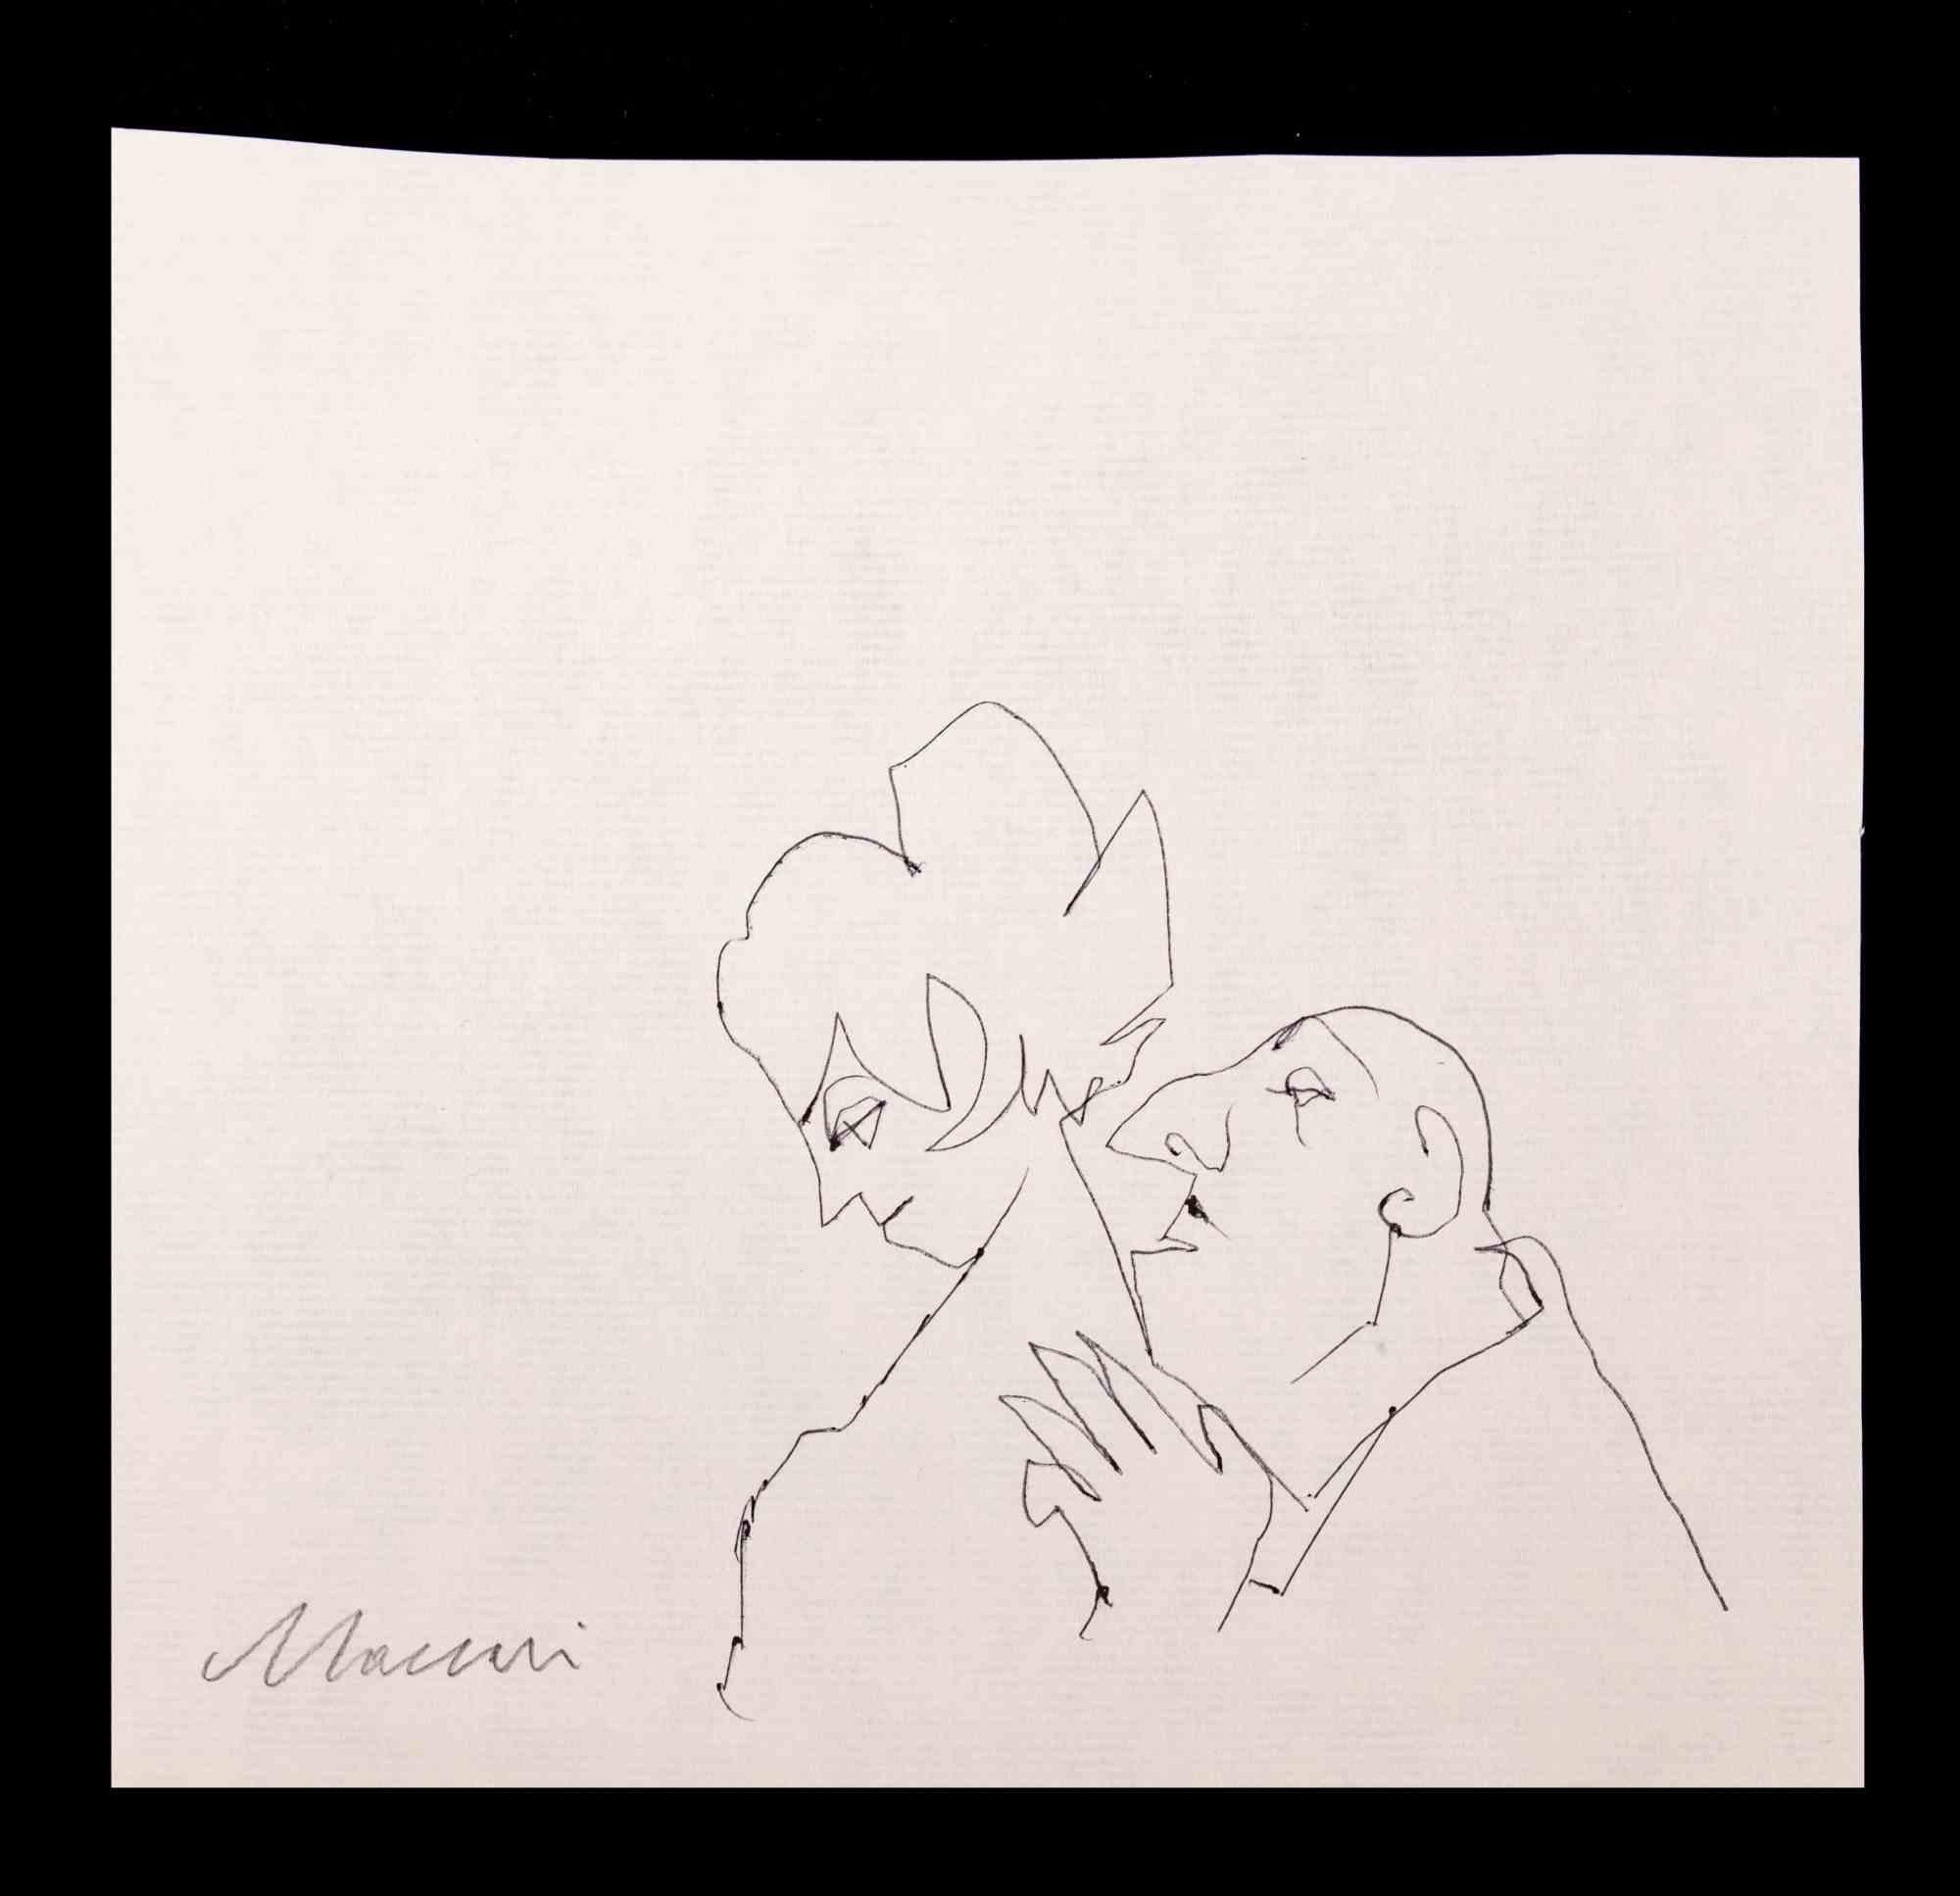 Lover is a china ink Drawing realized by Mino Maccari (1924-1989) in 1965.

Hand signed on the lower margin.

Good condition on a yellowed paper.

Mino Maccari (Siena, 1924-Rome, June 16, 1989) was an Italian writer, painter, engraver and